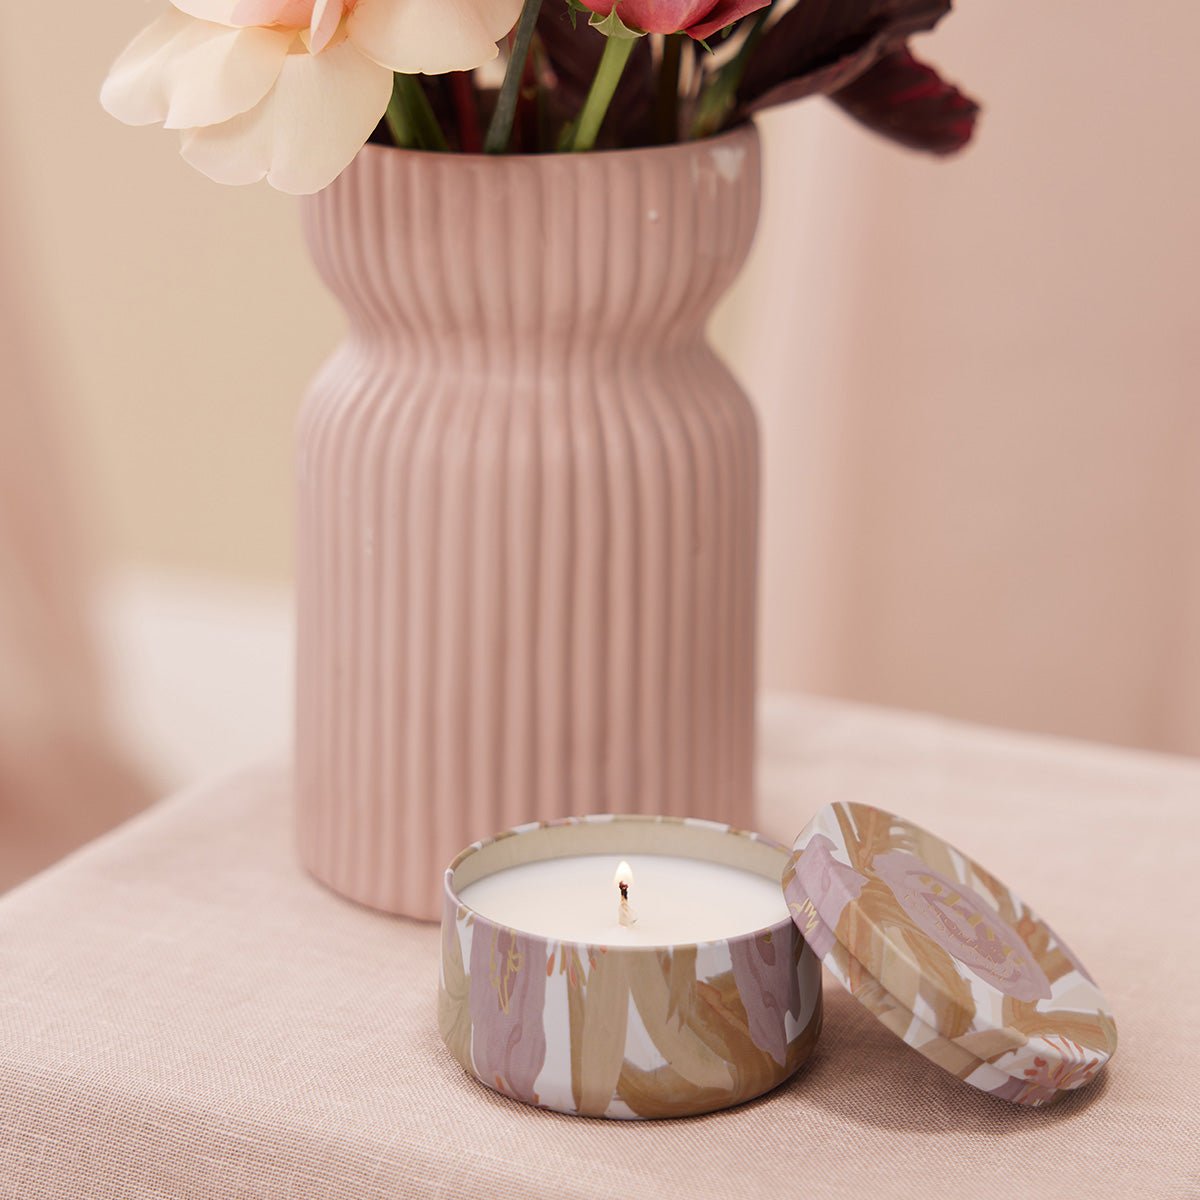 al.ive body | A Moment To Bloom Mini Candle